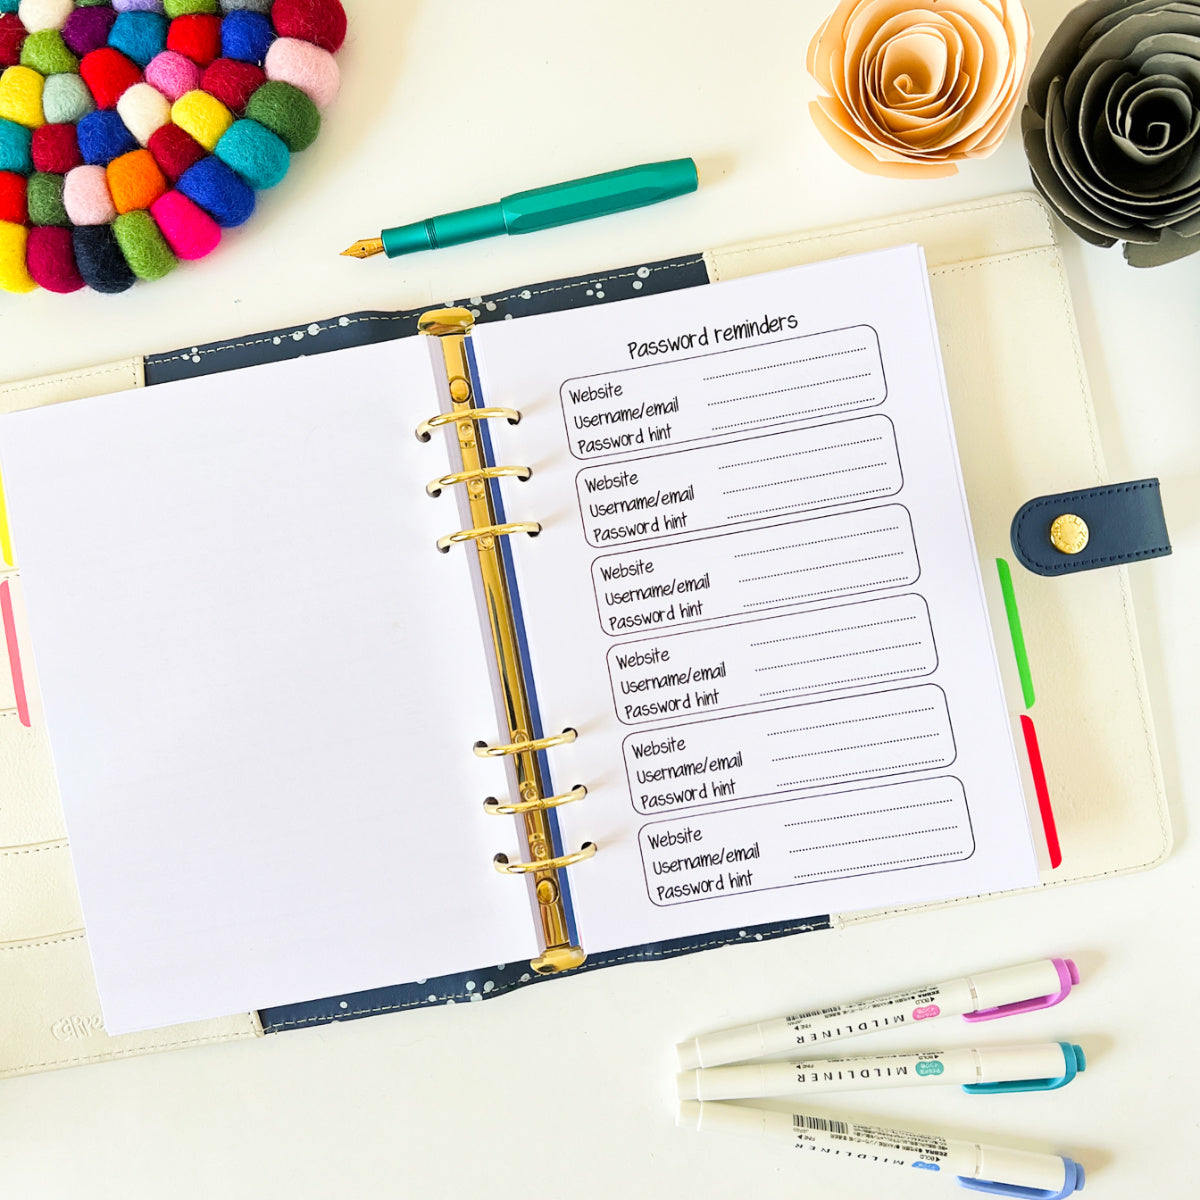 An open planner lies on a desk, featuring a Password Keeper page titled “Password reminders” with lines for website, username/email, and password hints. Around it are colorful pens, markers, a paper flower, and a felt ball coaster.